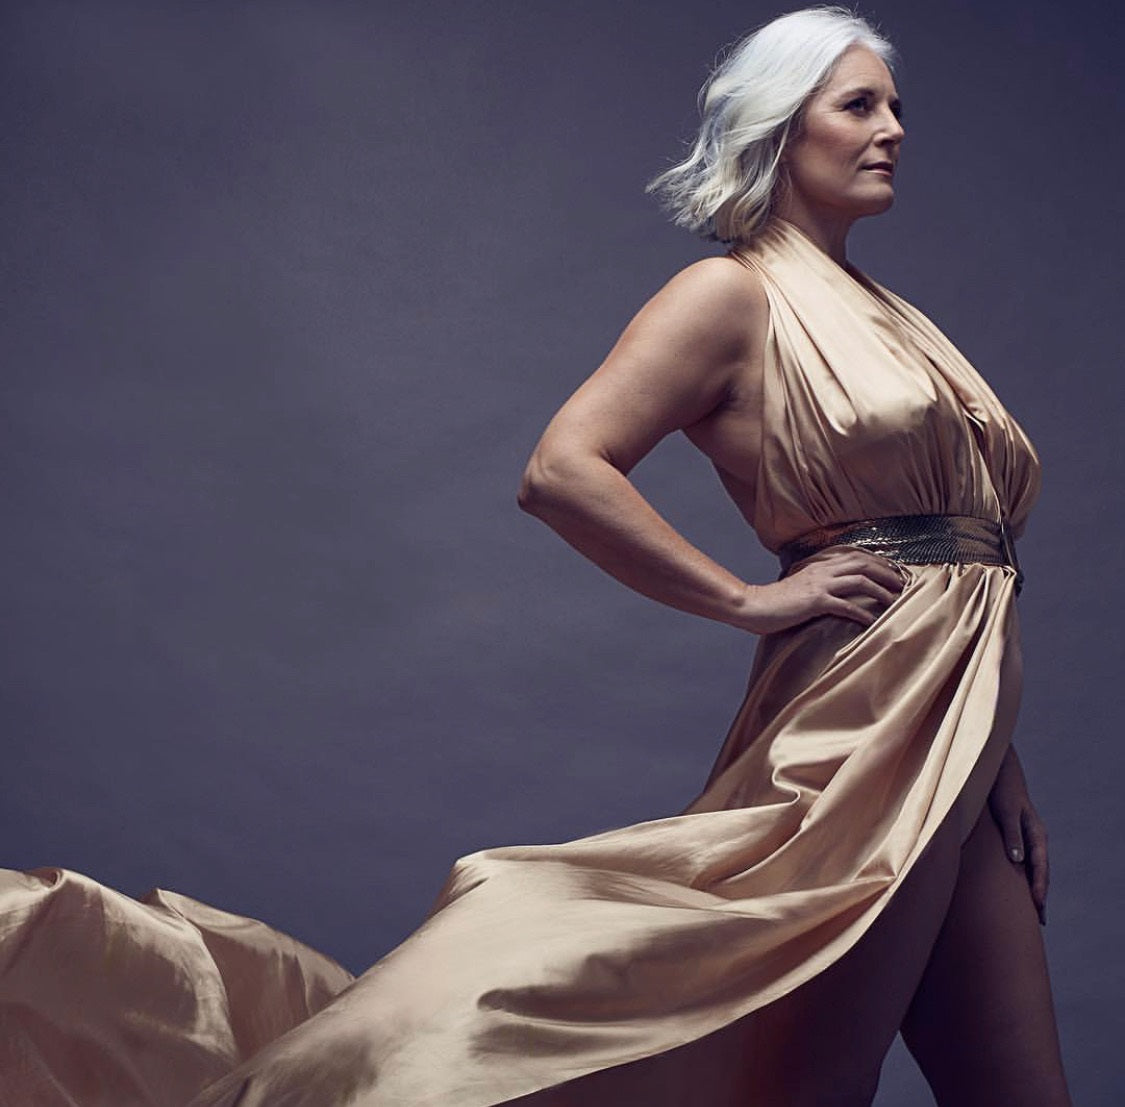 Rachel Peru Wearing gold gown, grey hair became model in her 40's 